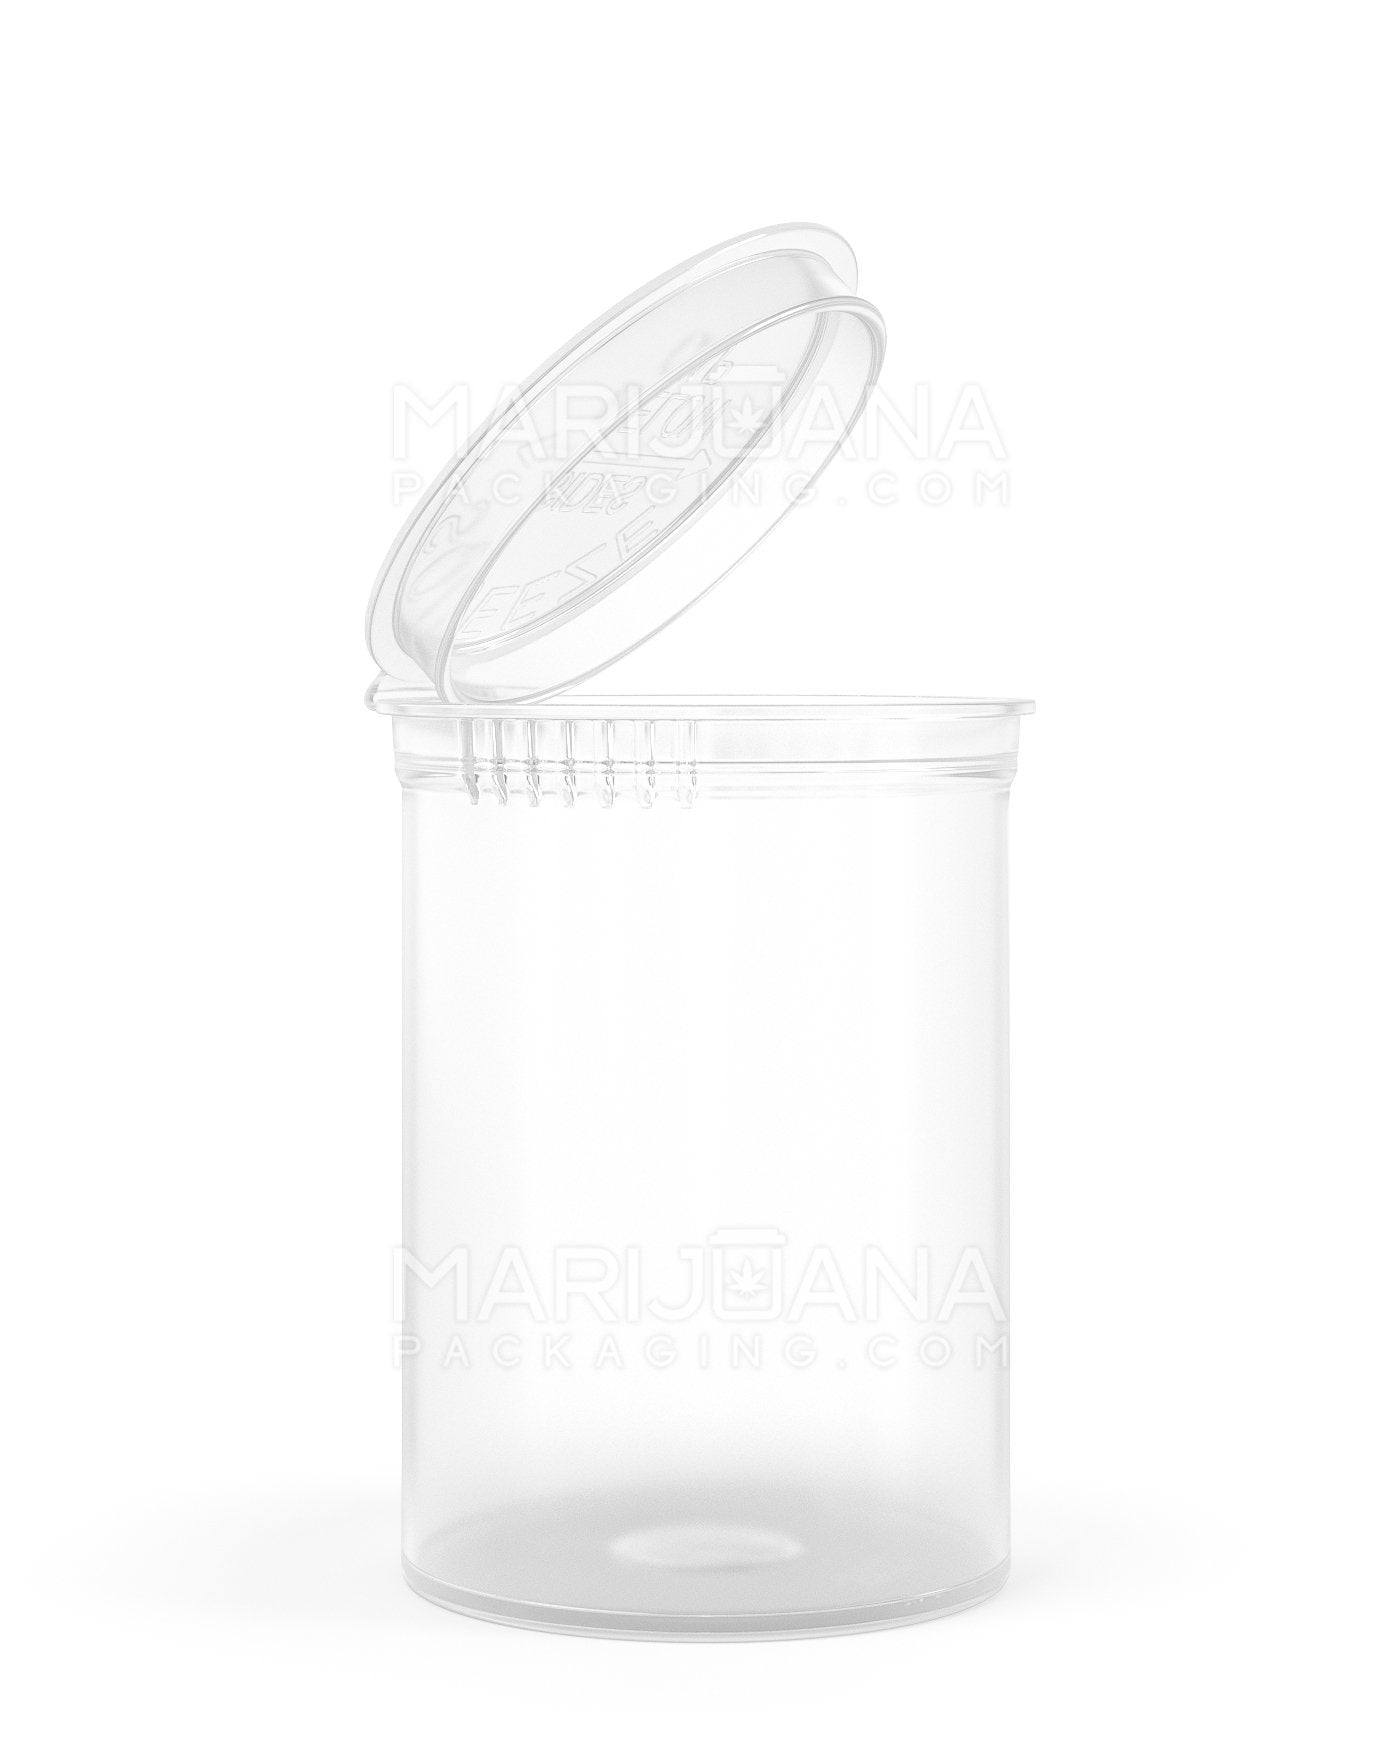 Child Resistant & Sustainable 100% Biodegradable Clear Pop Top Bottles | 30dr - 7g | Sample - 1